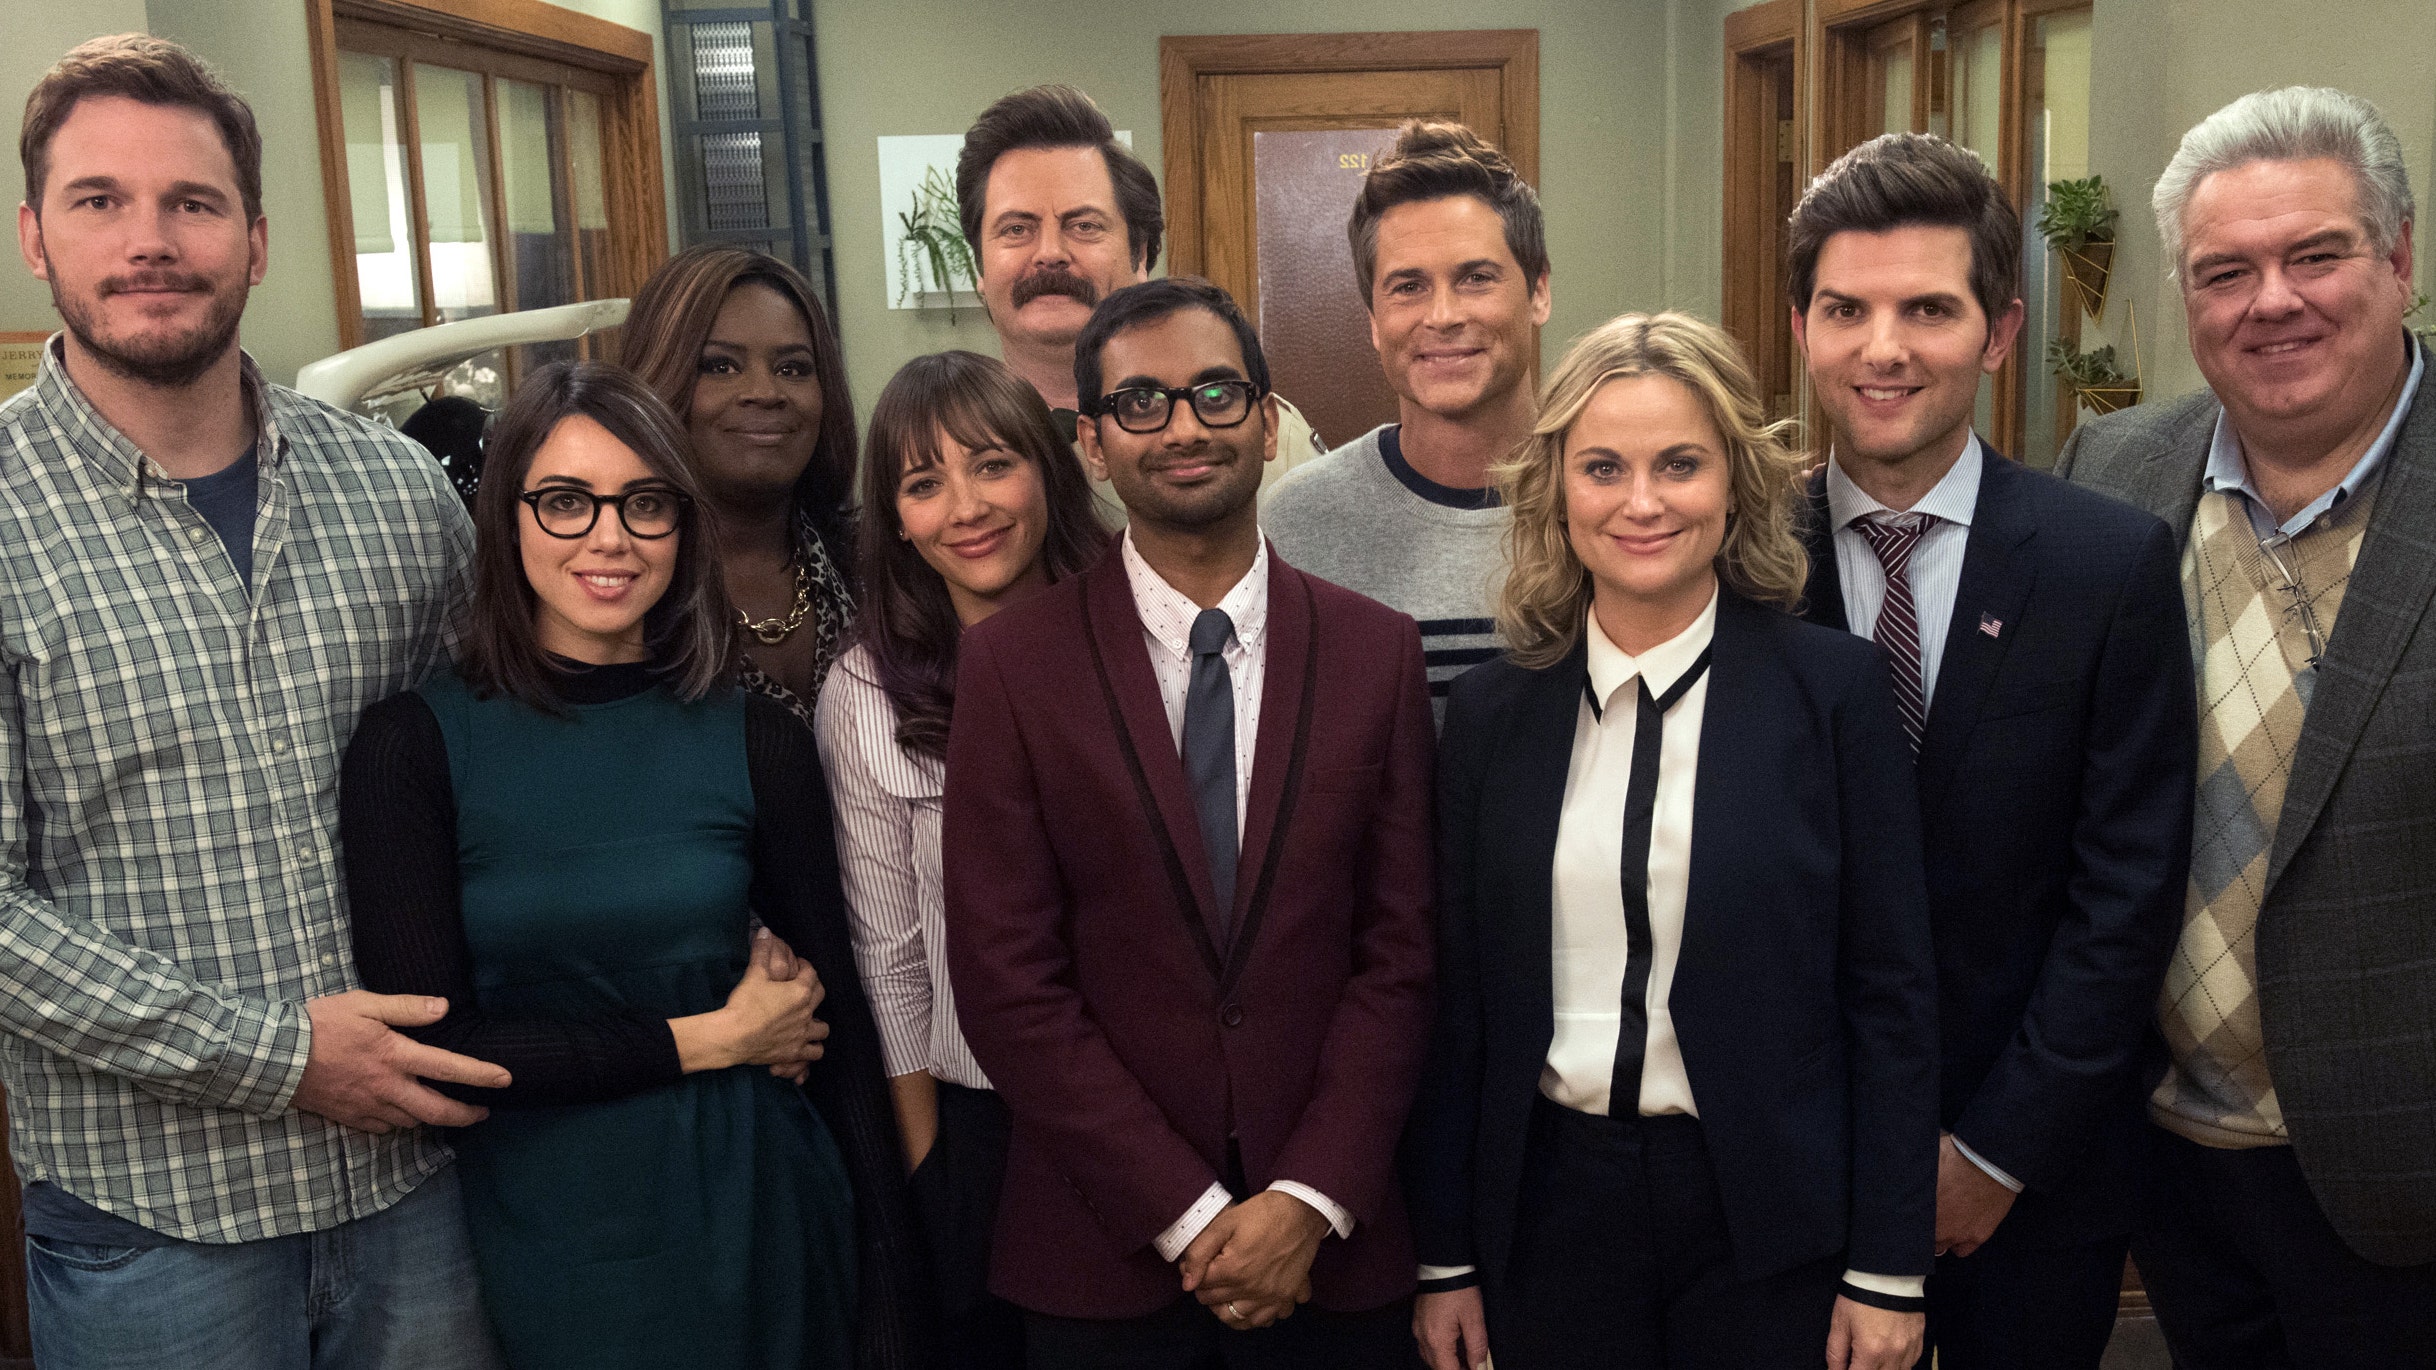 Parks and Recreation' cast reuniting to help Wisconsin Democrats